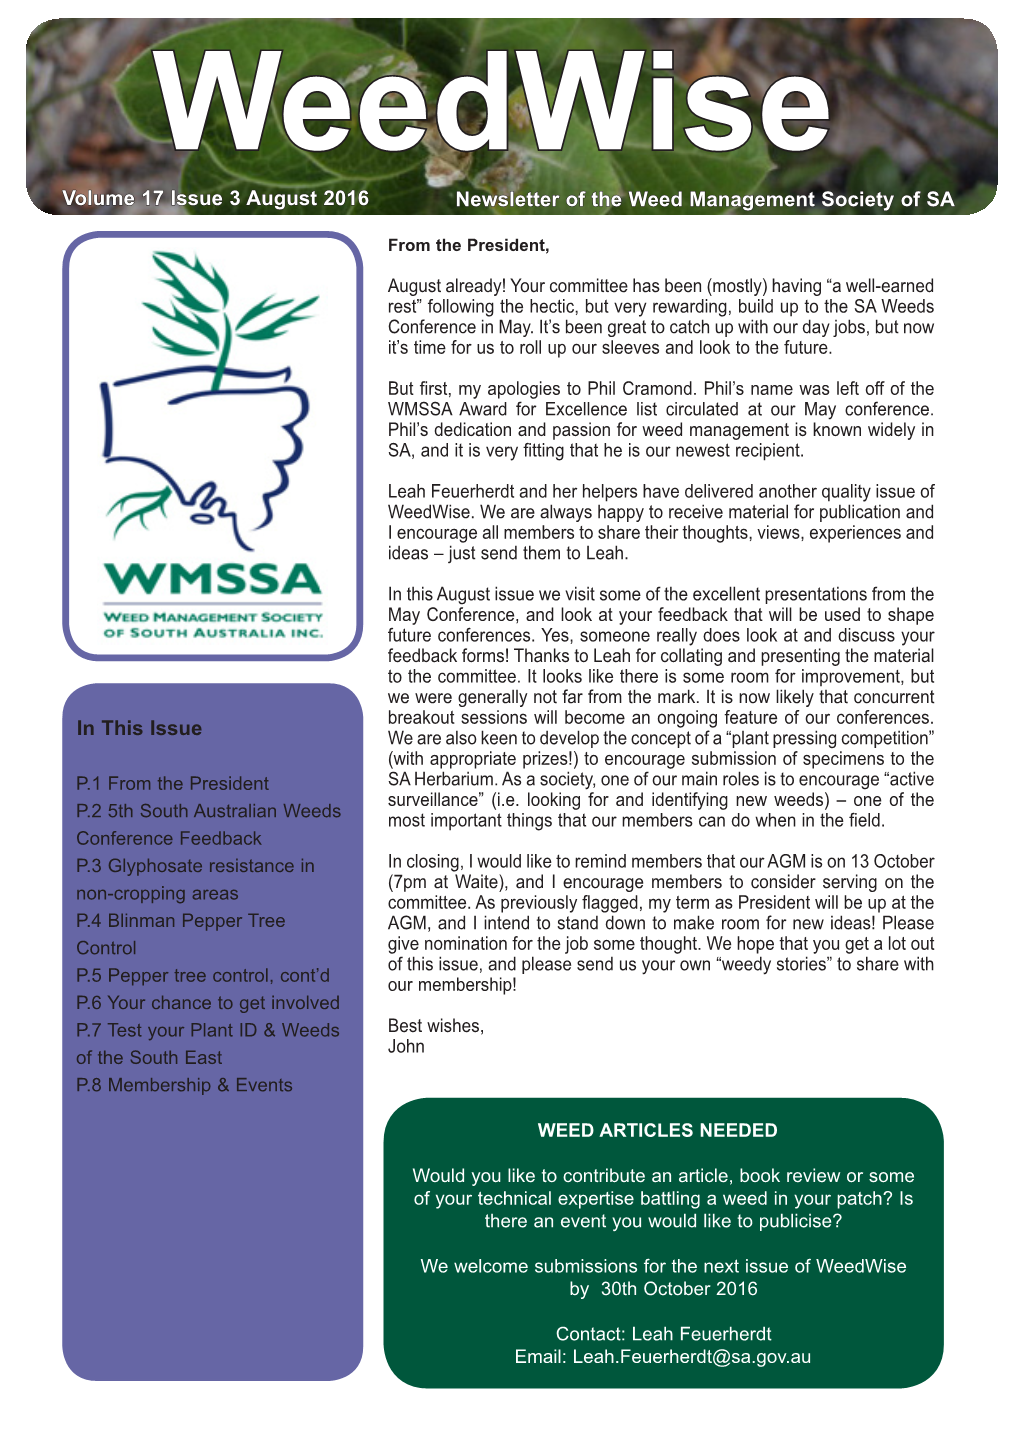 Weedwise Issue 3 August 2016